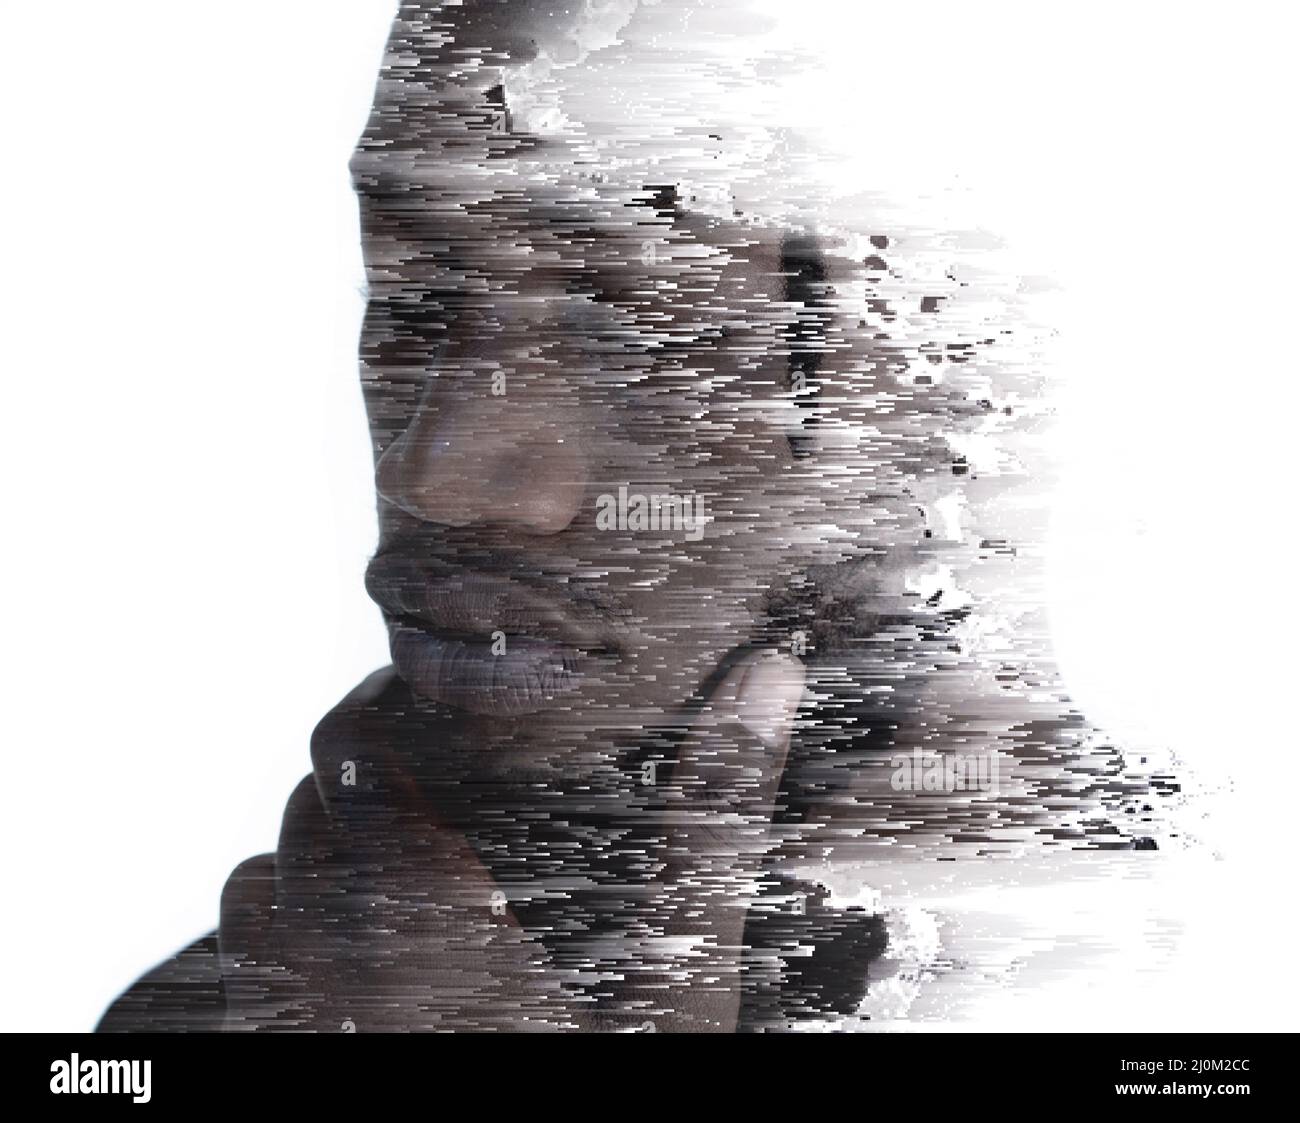 A portrait of a man combined with digital art in a double exposure technique Stock Photo